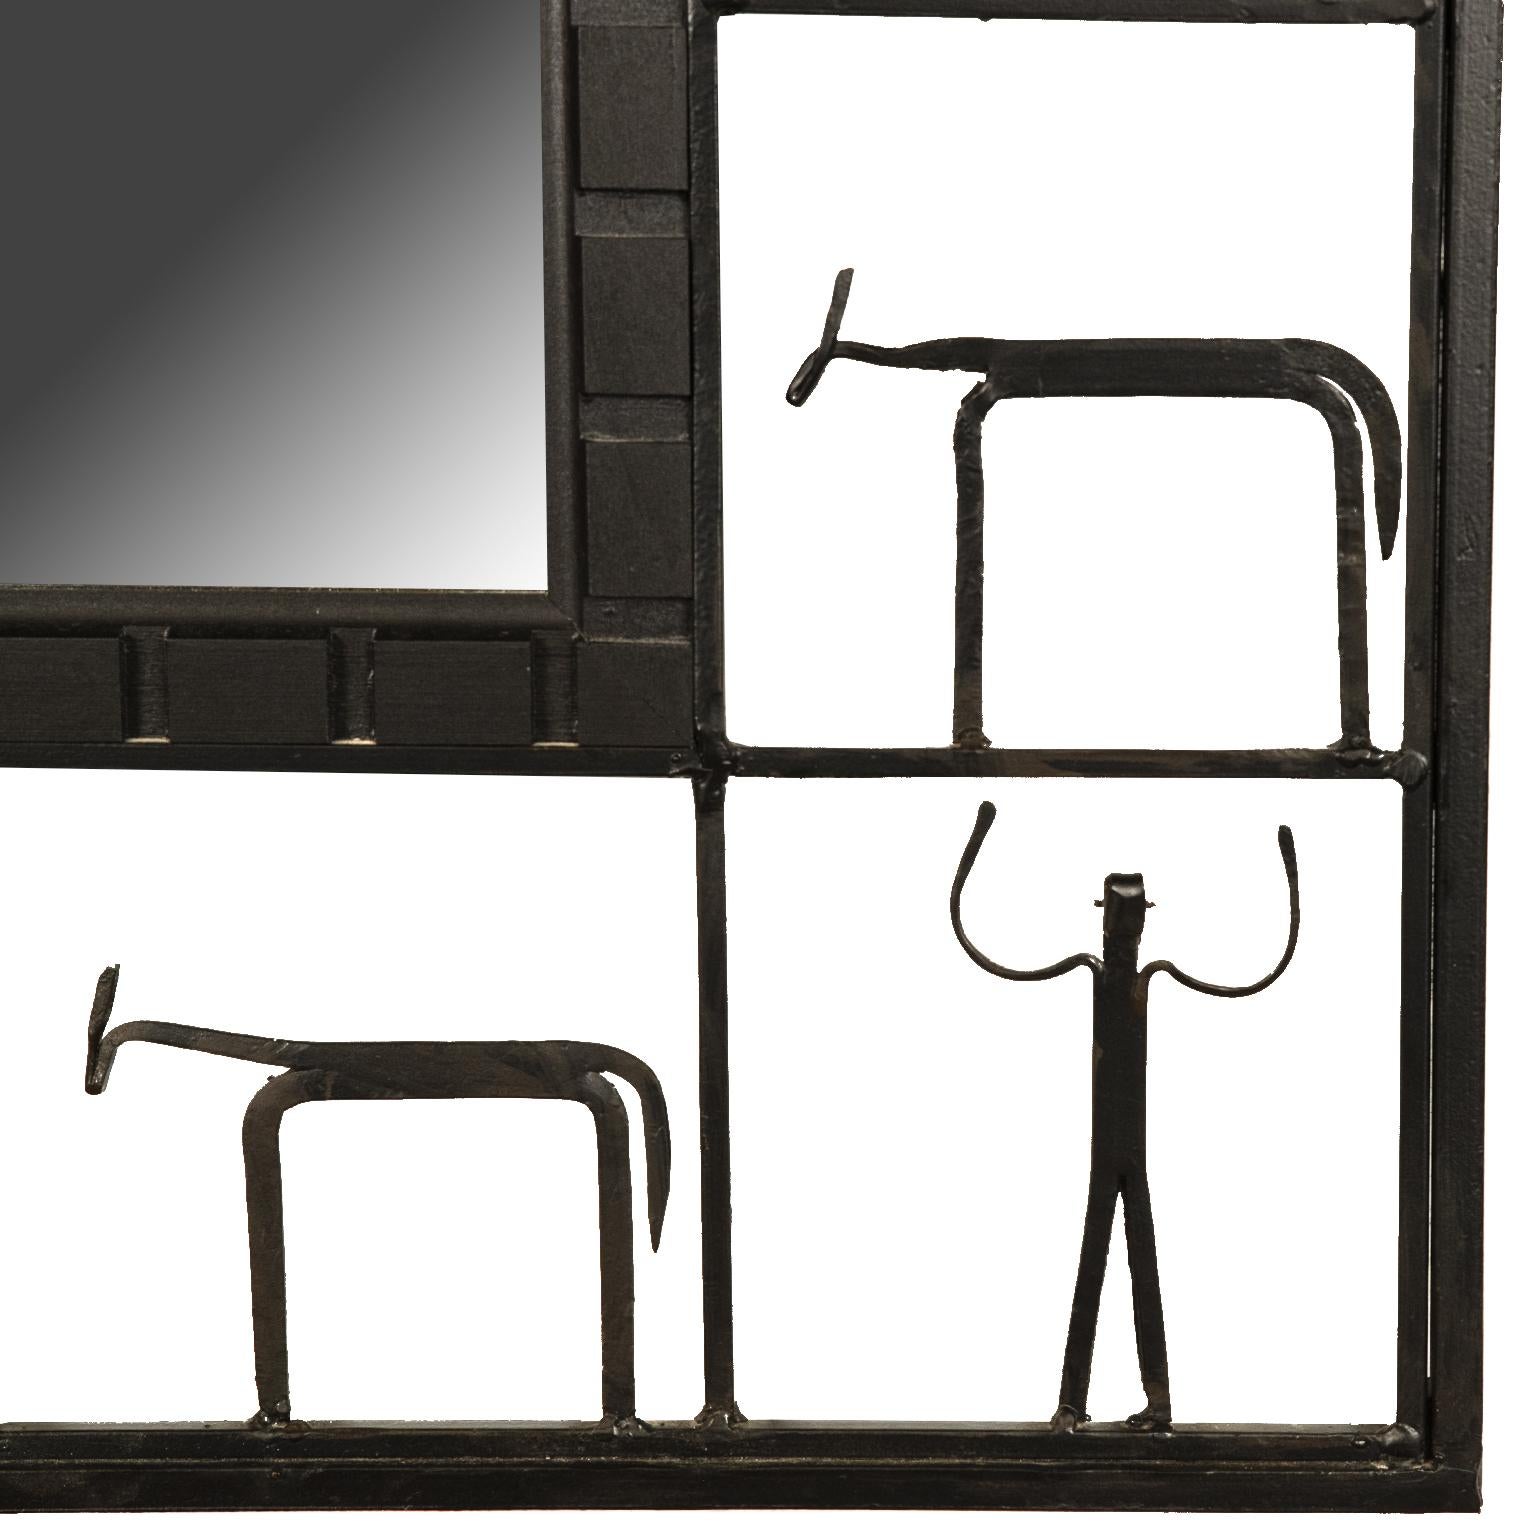 This is a wonderful and whimsical rectangular mirror with an openwork iron frame depicting human and animal forms housing a rectangular mirror. 